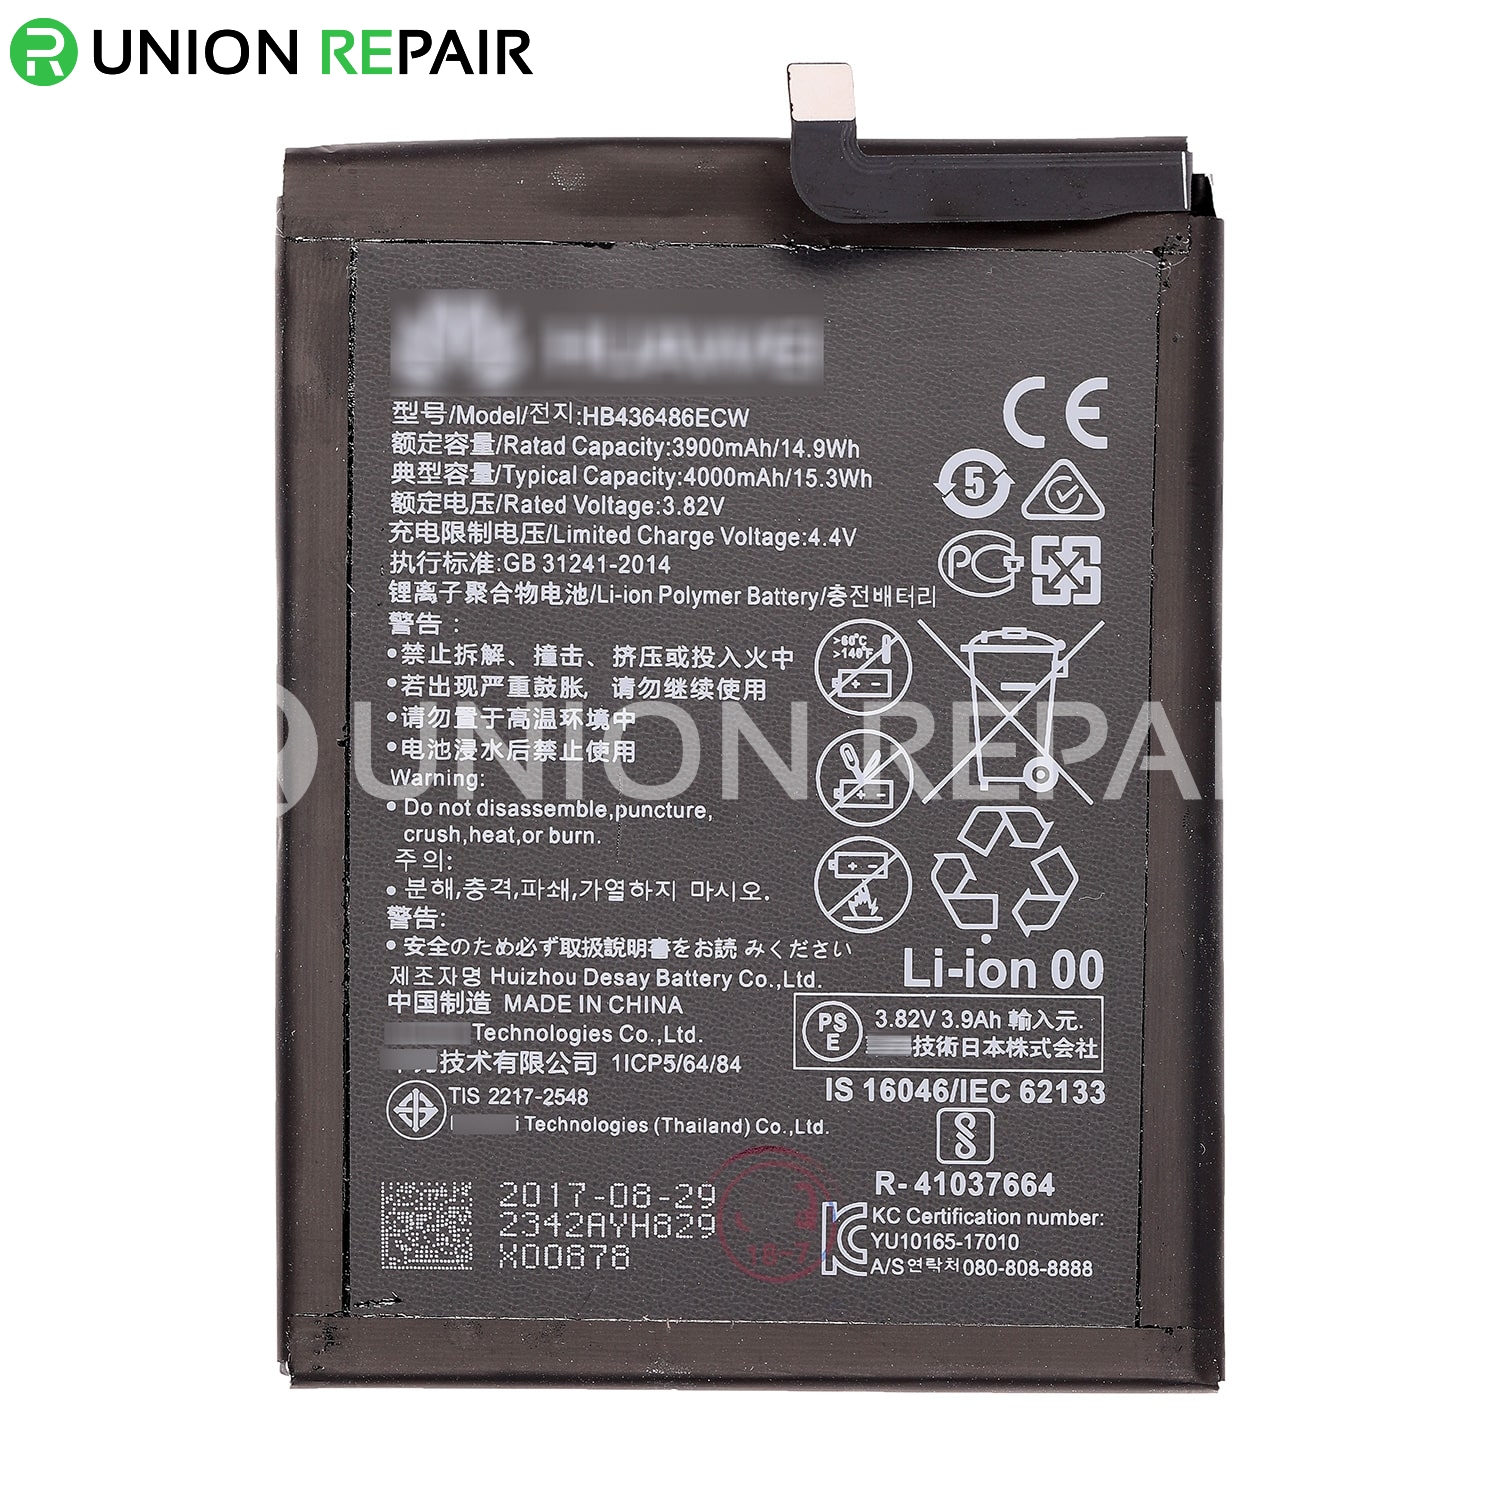 Replacement for Huawei Mate 10 Battery 4000mAh